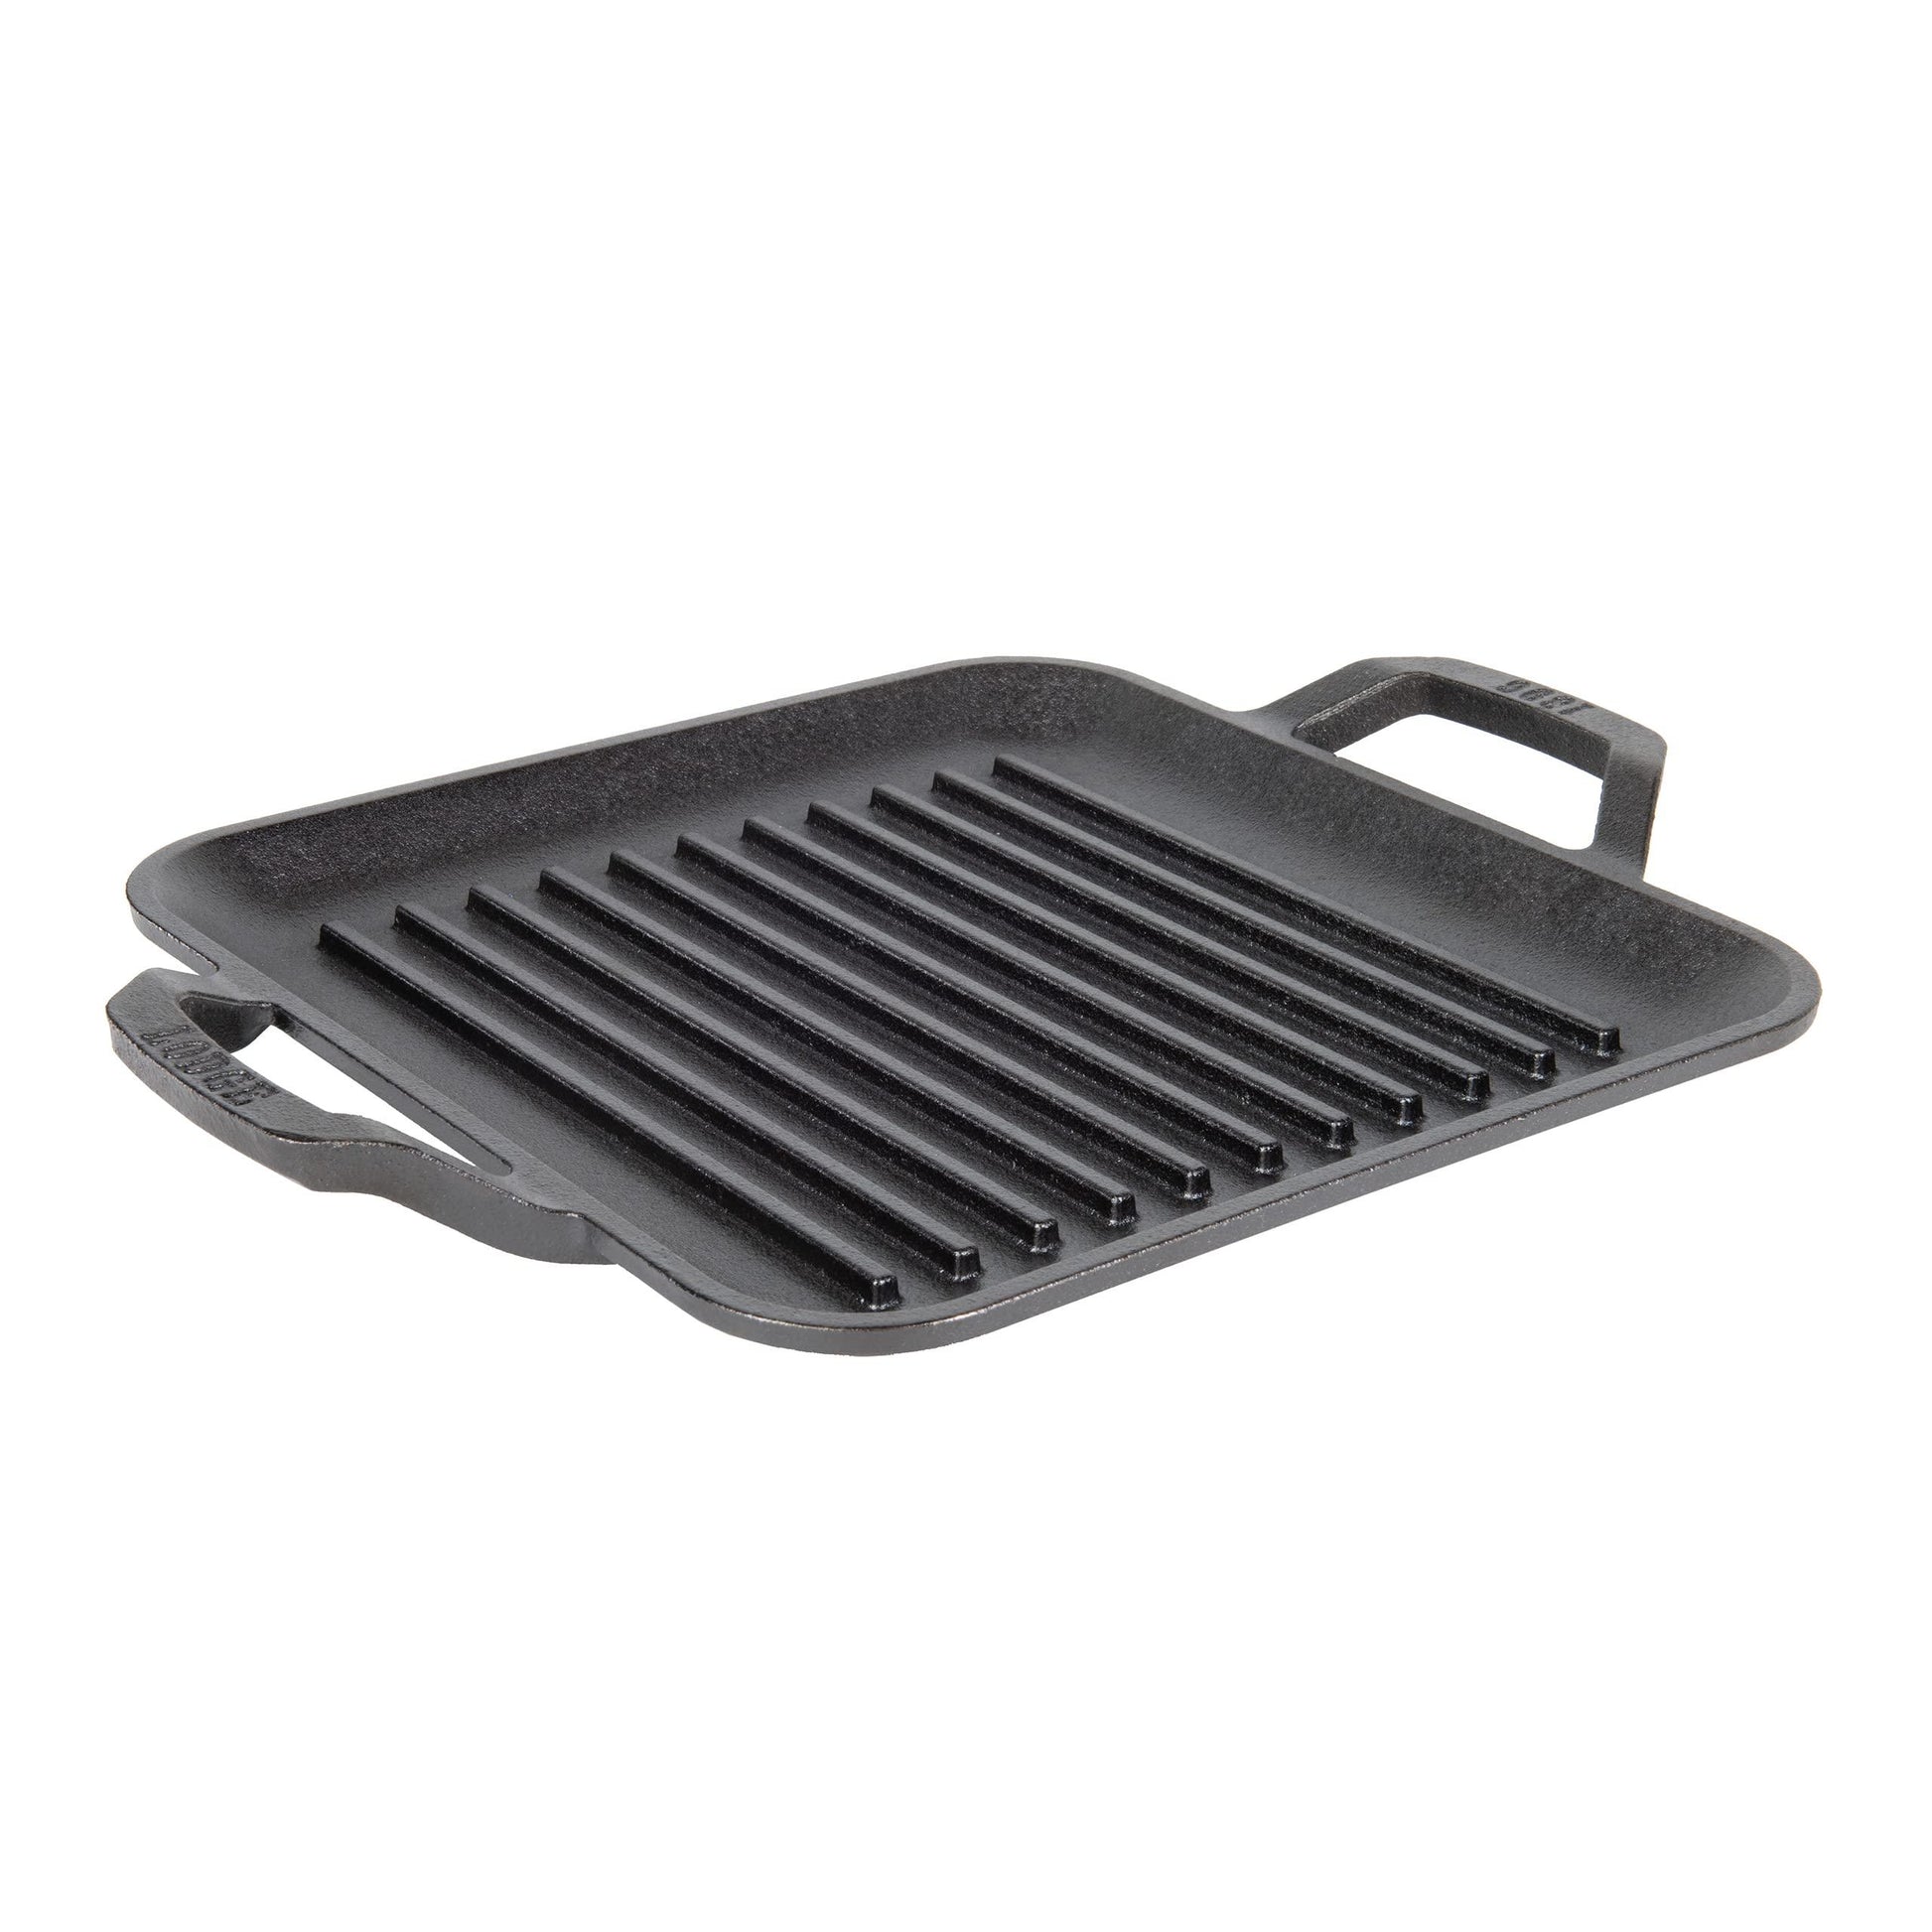 Lodge Cast Iron Chef Collection Square Grill Pan, Pre-Seasoned - 11 in - CookCave